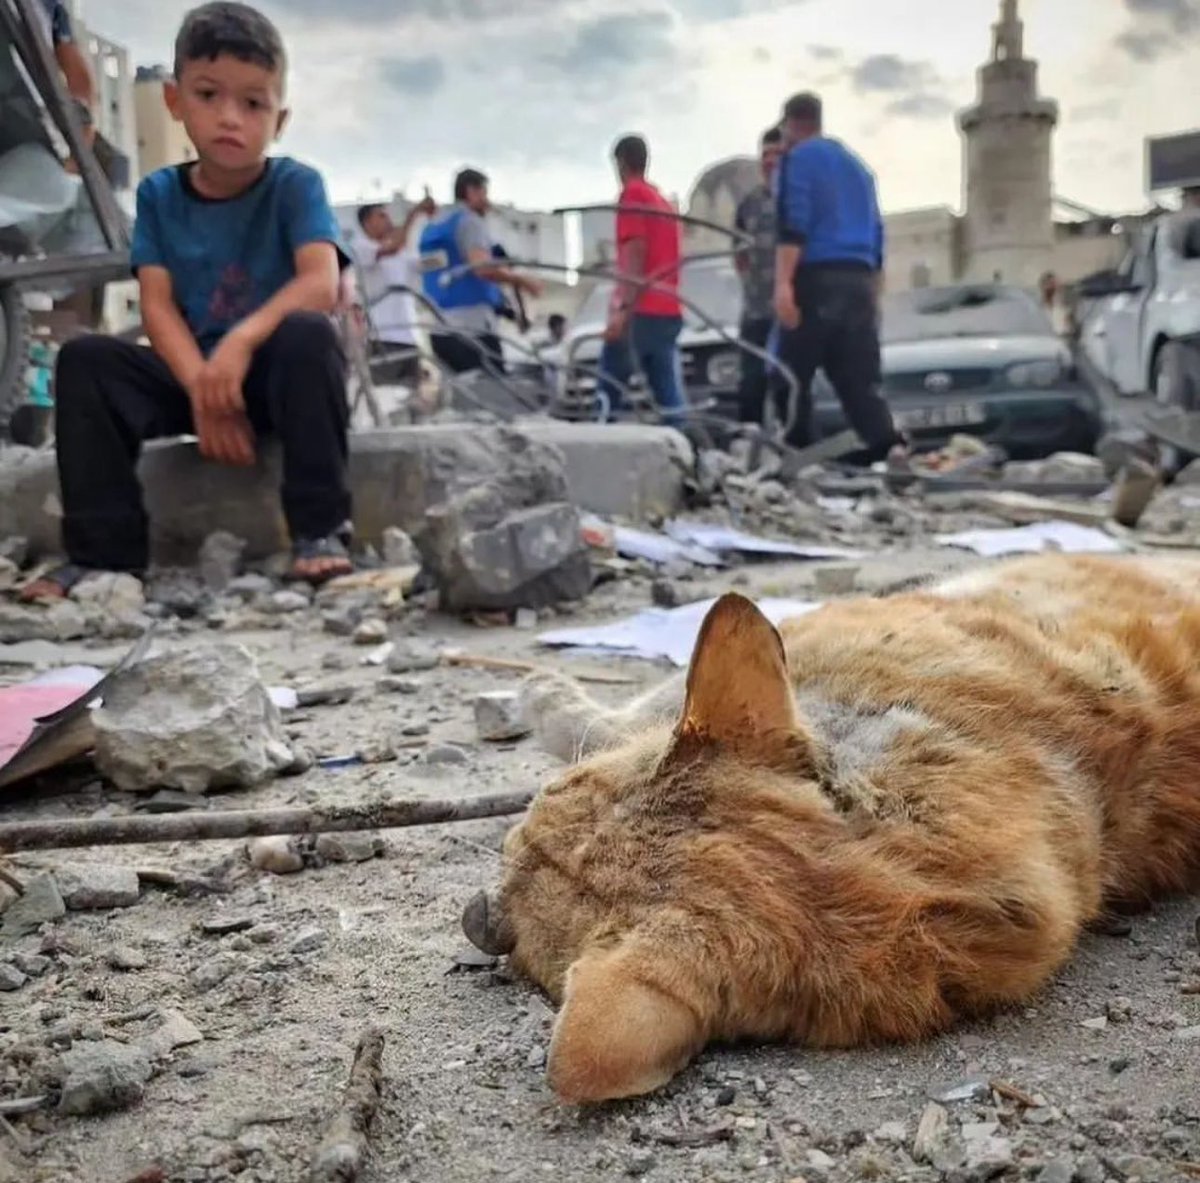 Too much innocents have lost their souls for no reason but just because they live in Gaza, tons of animals are suffering but no one talk about them, even aid entities don't include helping gaza animals whom are innocent souls too, gaza animals are on pain and they deserve our